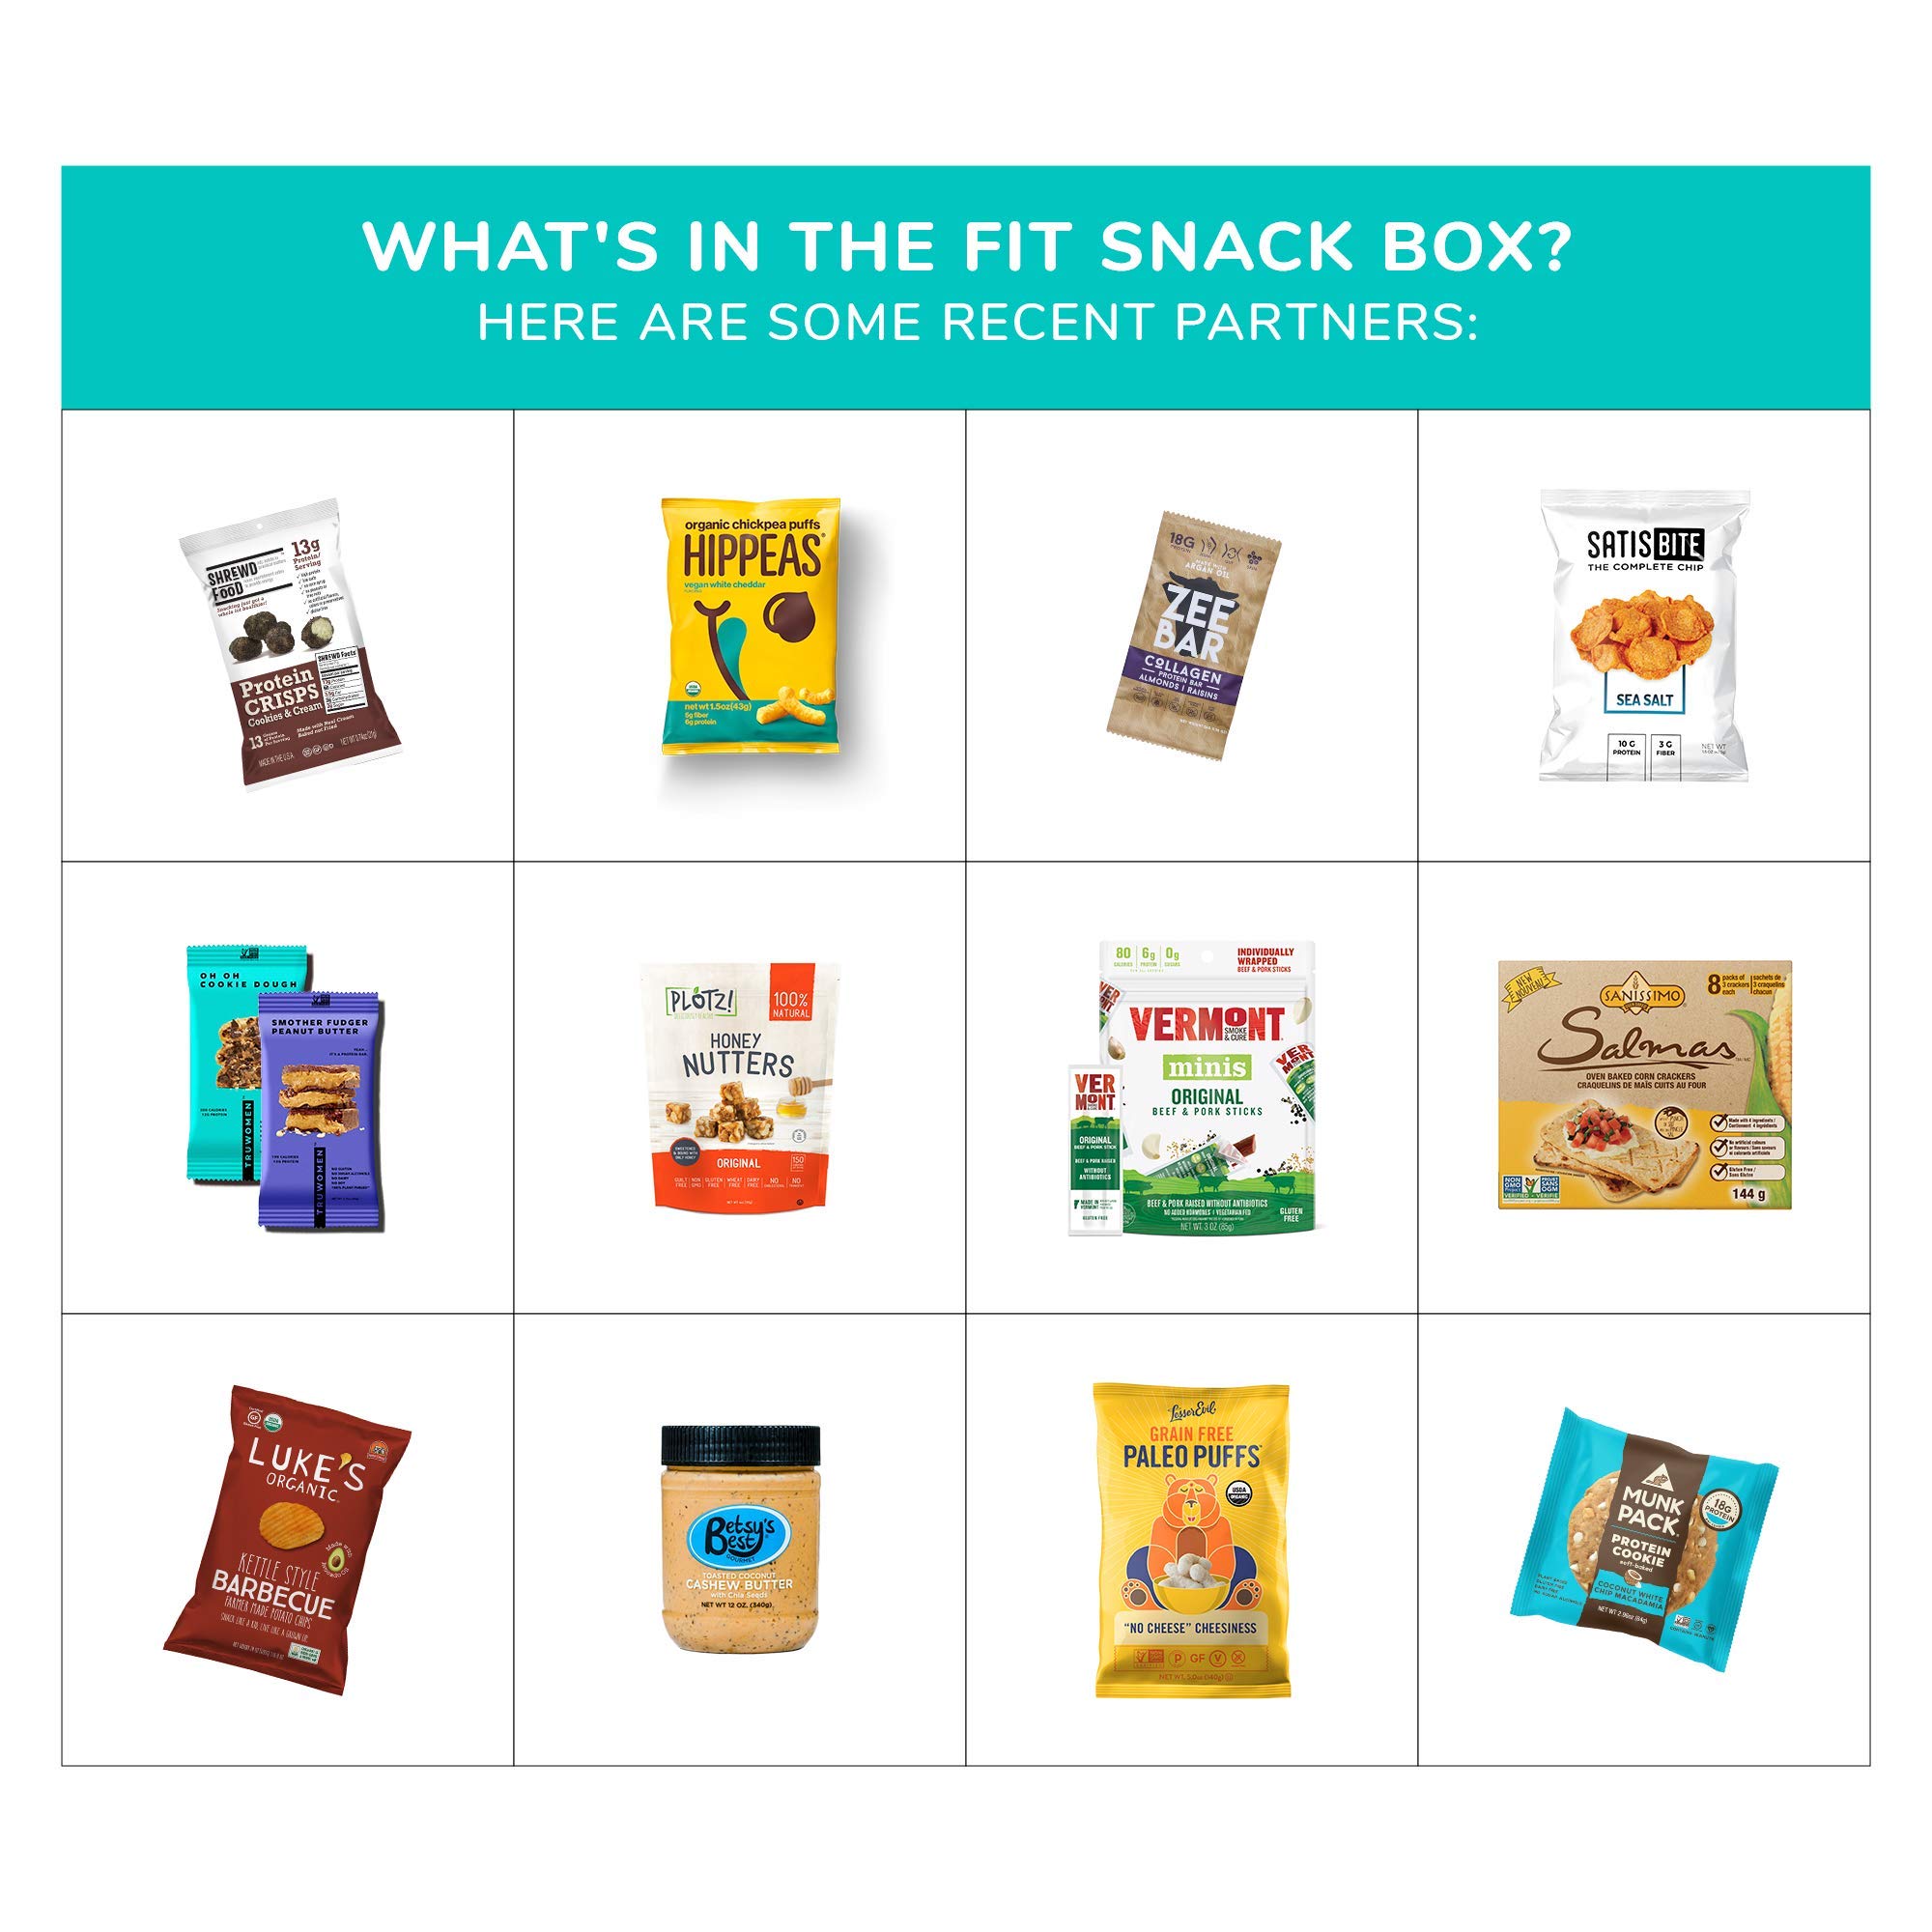 Fit Snack - Healthy Snack Subscription Box - The World’s Healthiest, Best-Tasting Brands, Monthly Workouts and Nutrition Tips. Wellness in a Box!